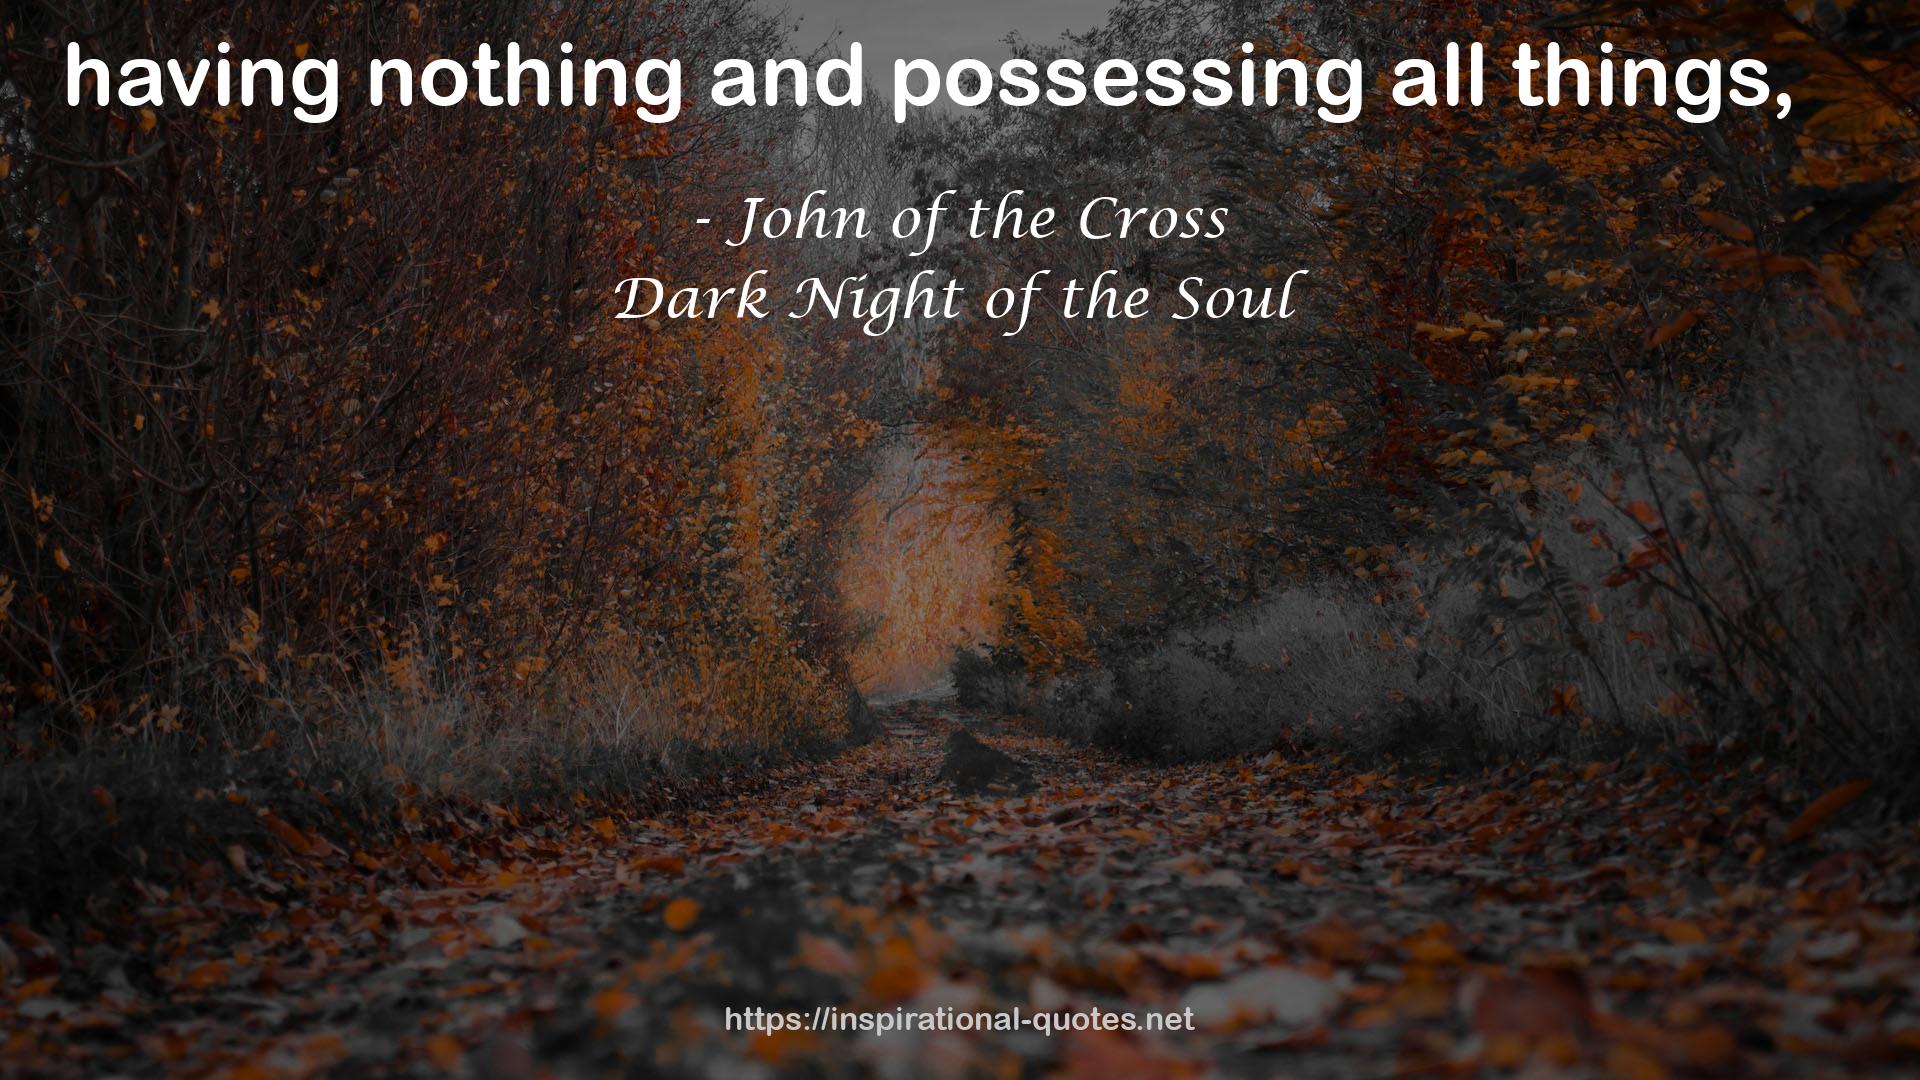 Dark Night of the Soul QUOTES